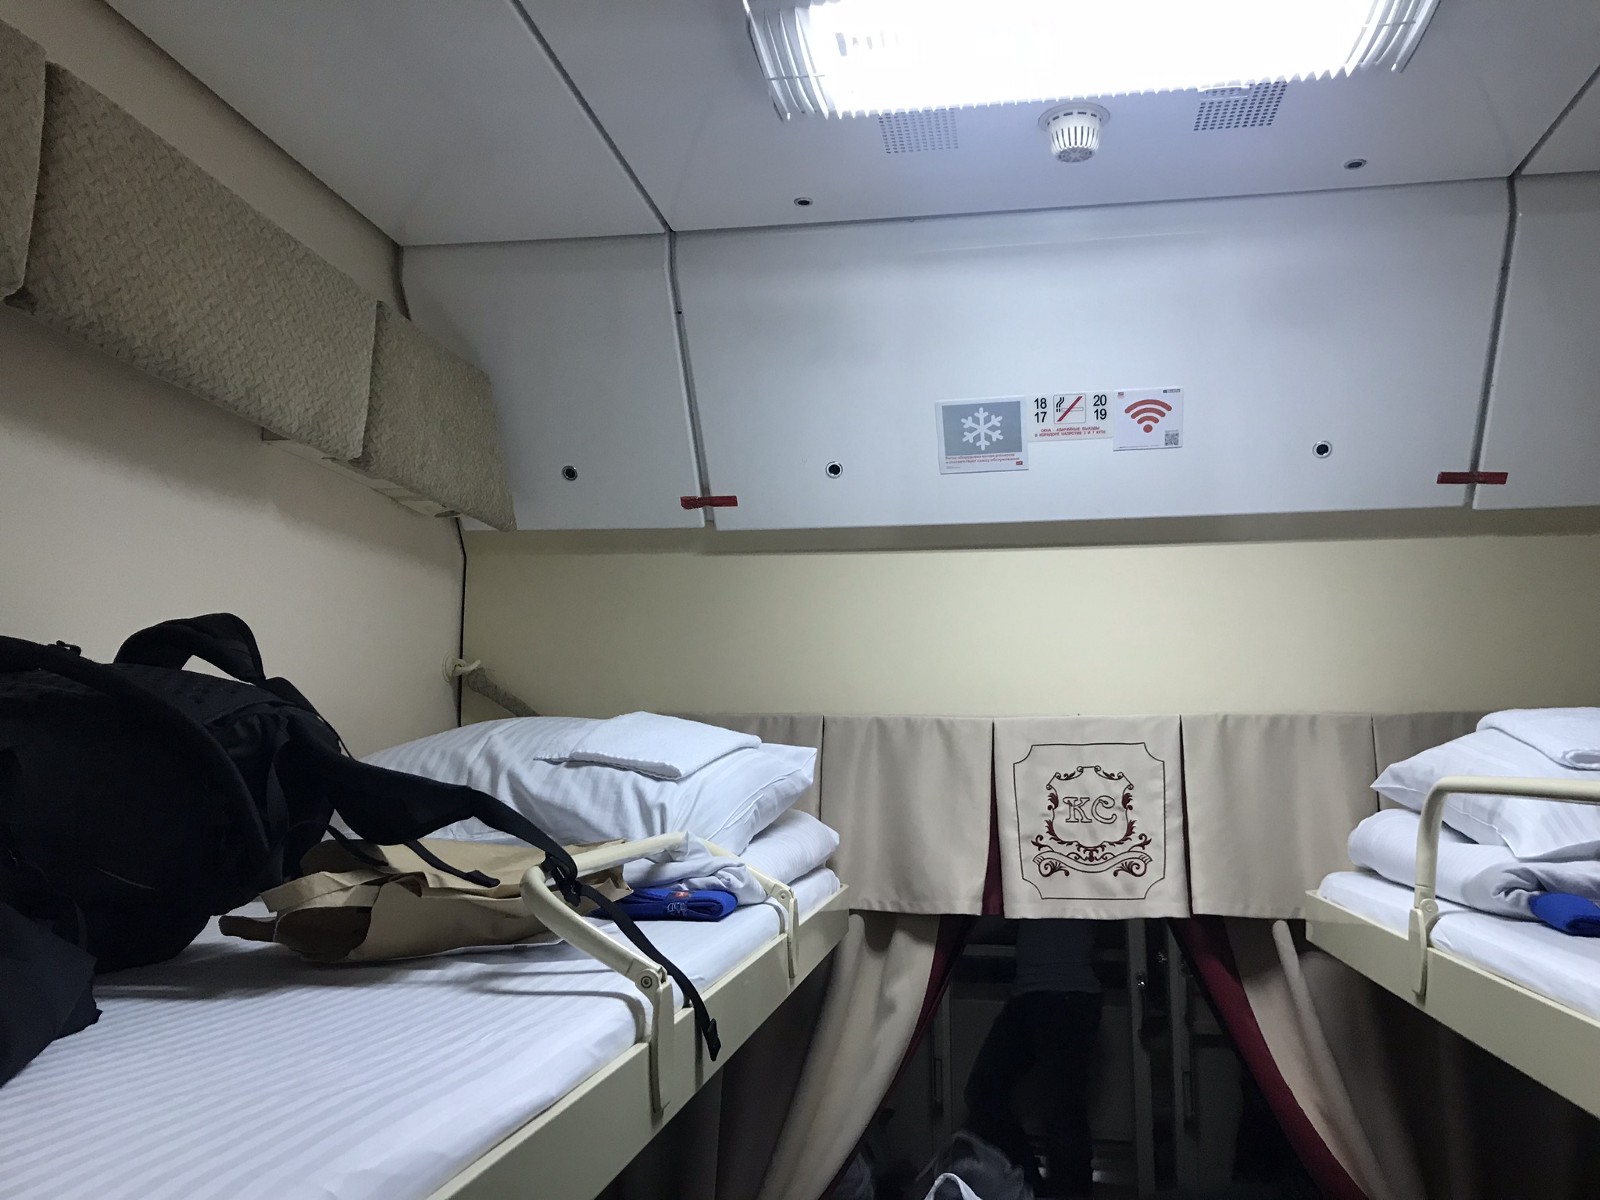 Upper berths of the four-person, second-class cabin.